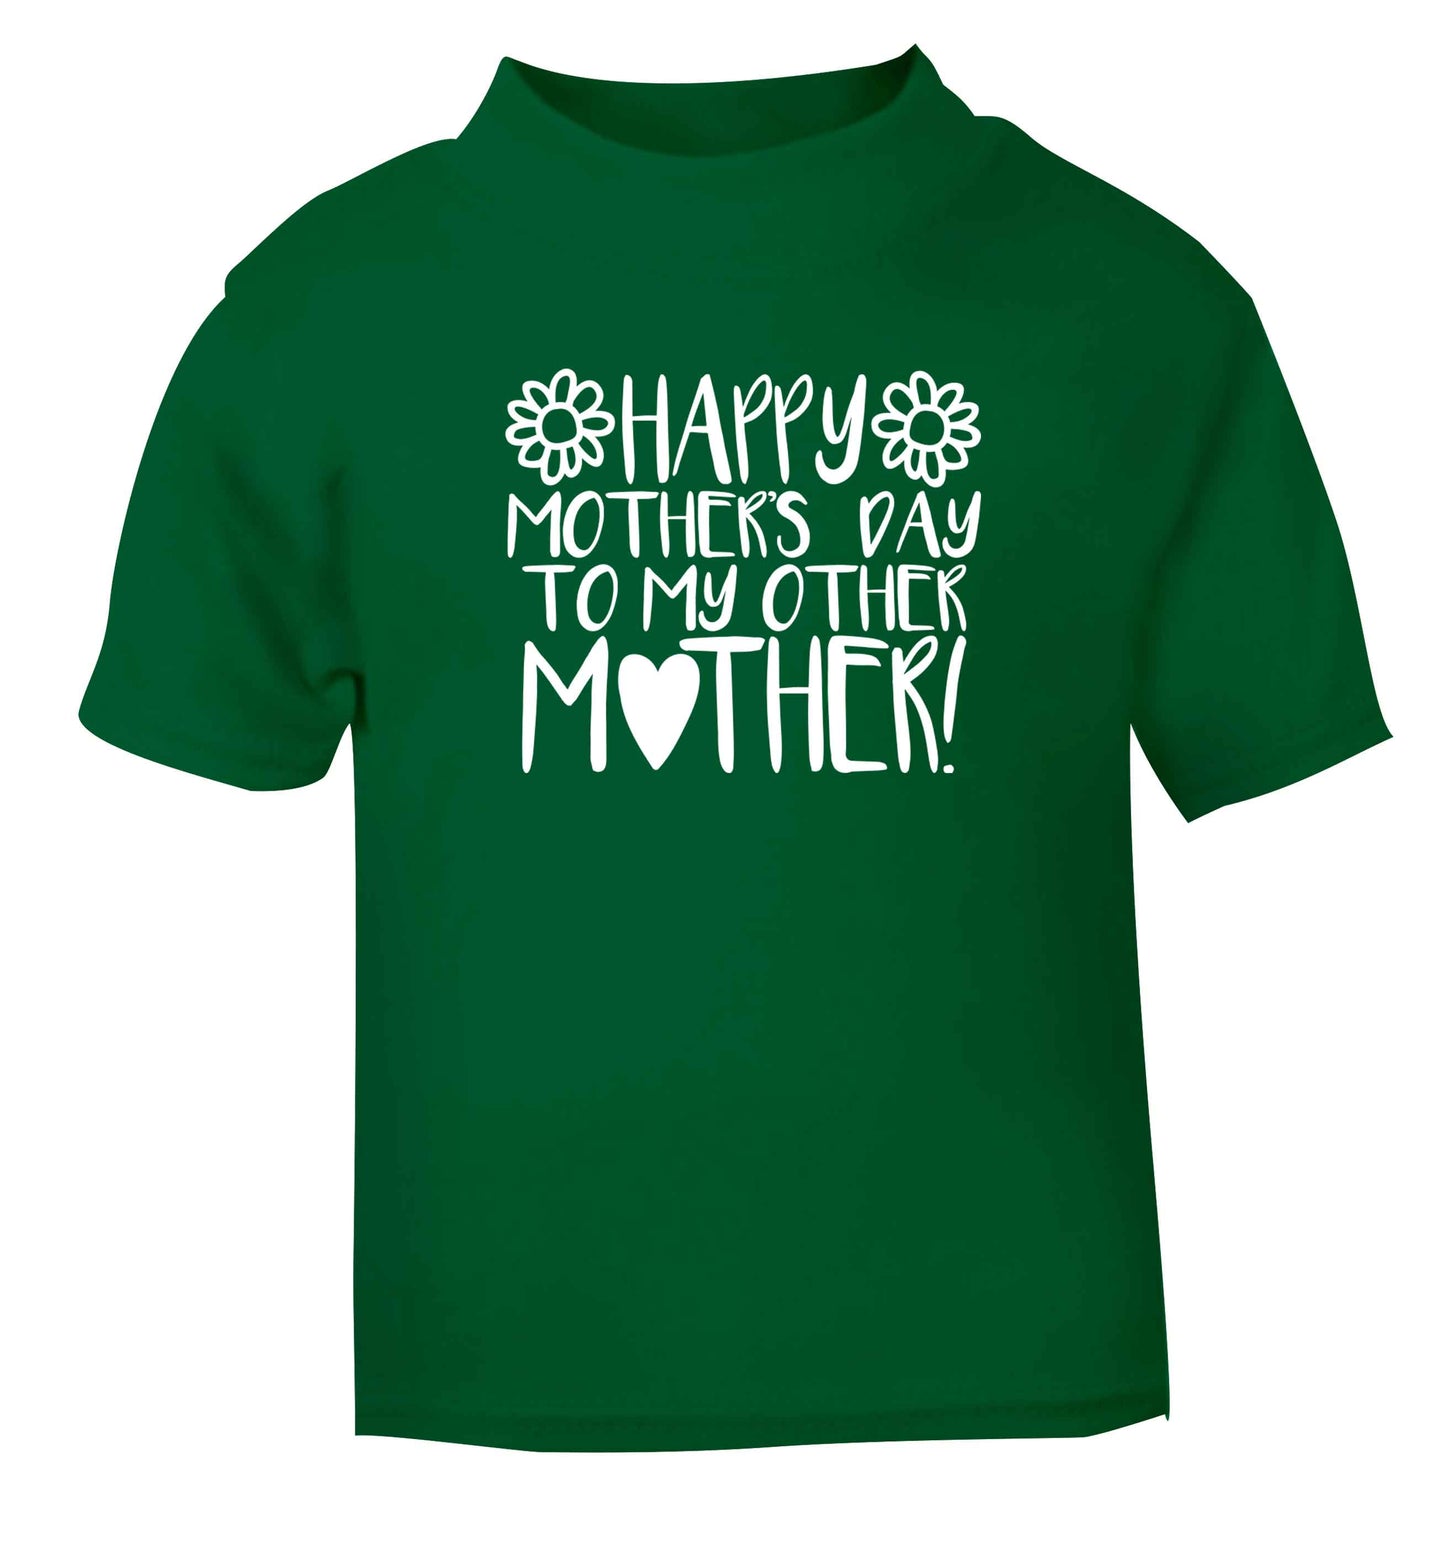 Happy mother's day to my other mother green baby toddler Tshirt 2 Years